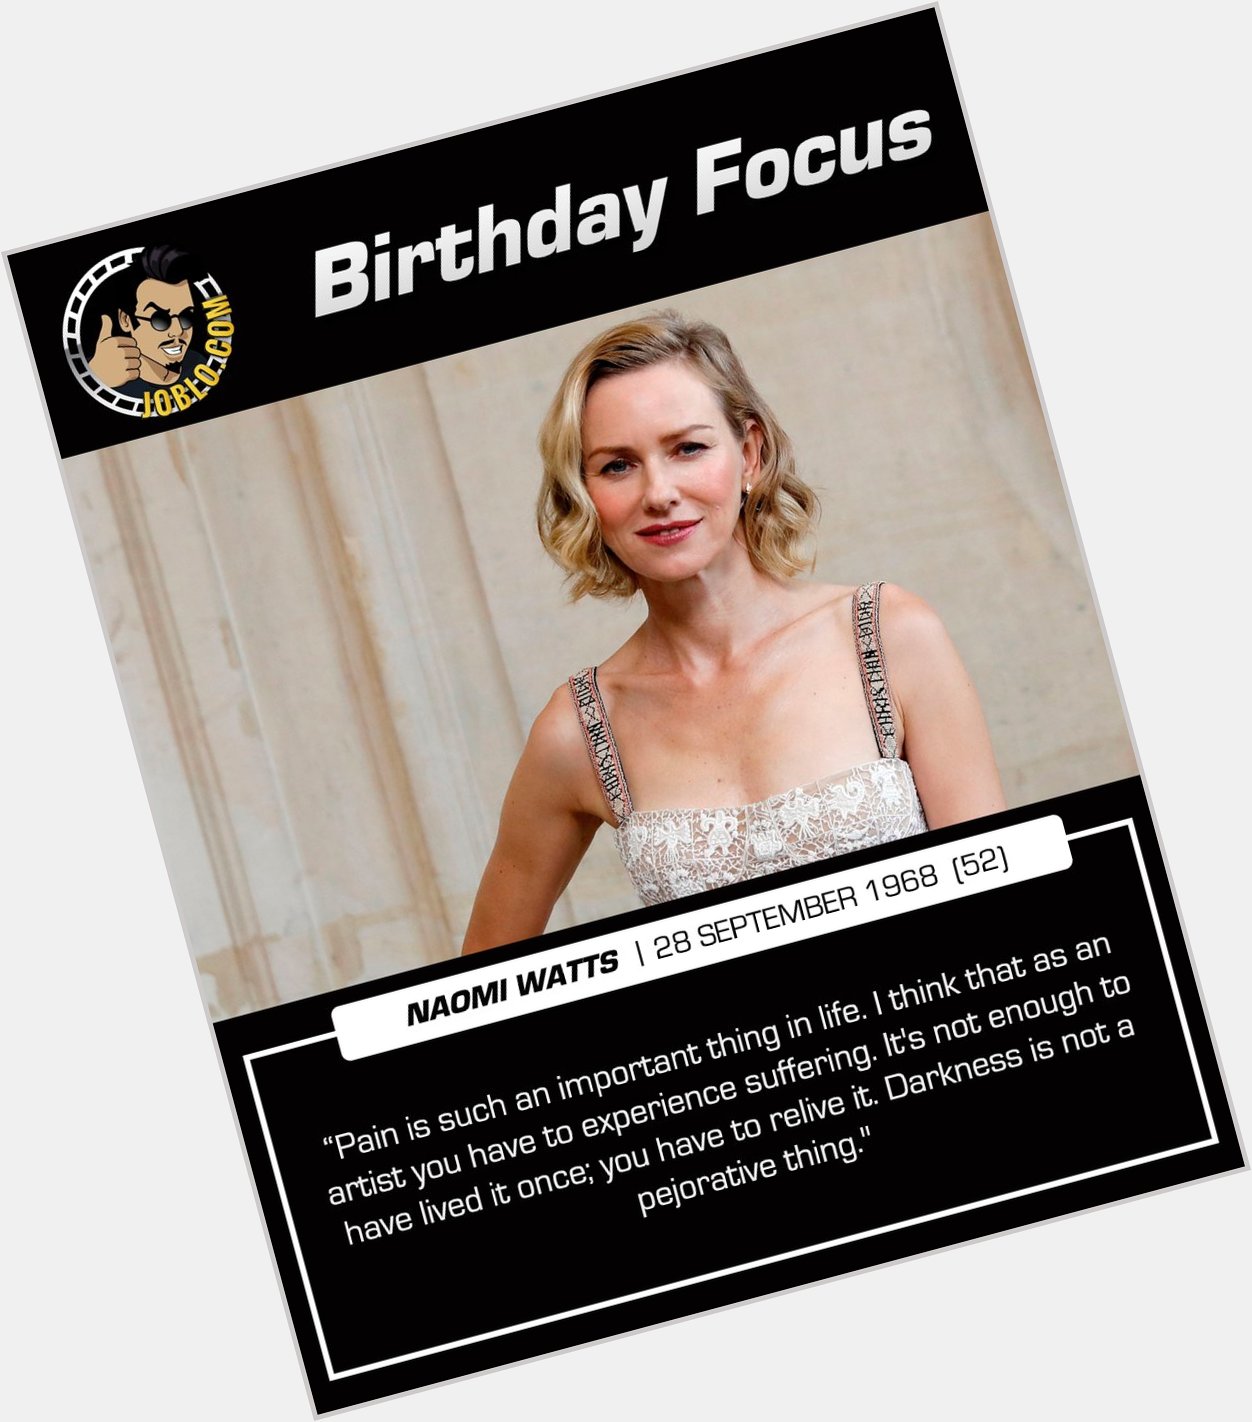 Happy 52nd birthday to Naomi Watts!

What is your favorite performance of hers? 